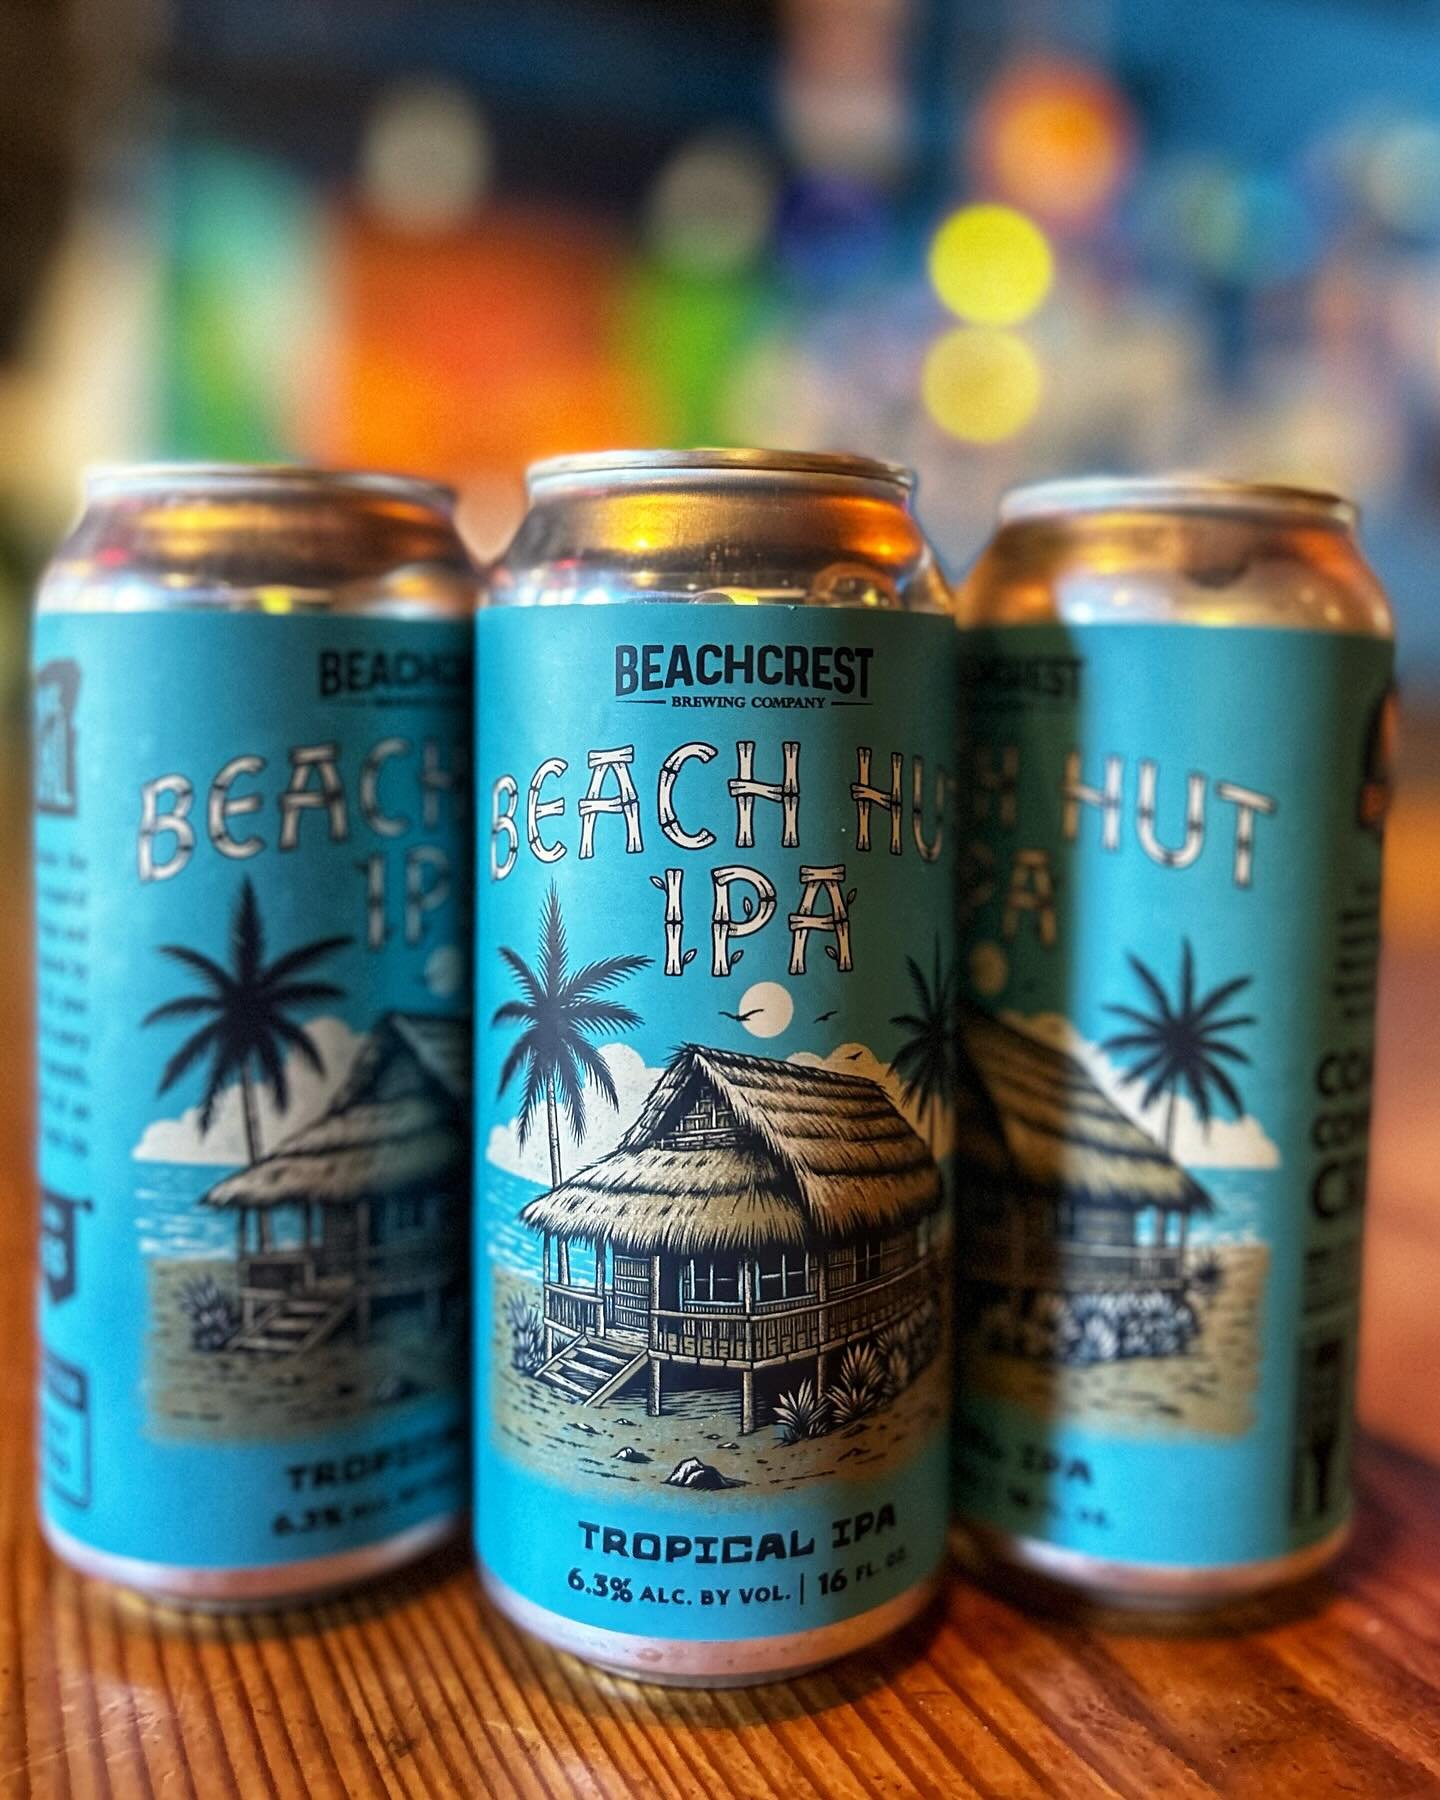 Have you tried our newest release the Beach Hut IPA? Packed with Galaxy, Nectaron and El Dorado hops it&rsquo;s like an escape to tropical paradise for your tastebuds. 
🌊🌴☀️🍺

Come sip a pint in the sunny beer garden or grab a 4-pack to go and kic